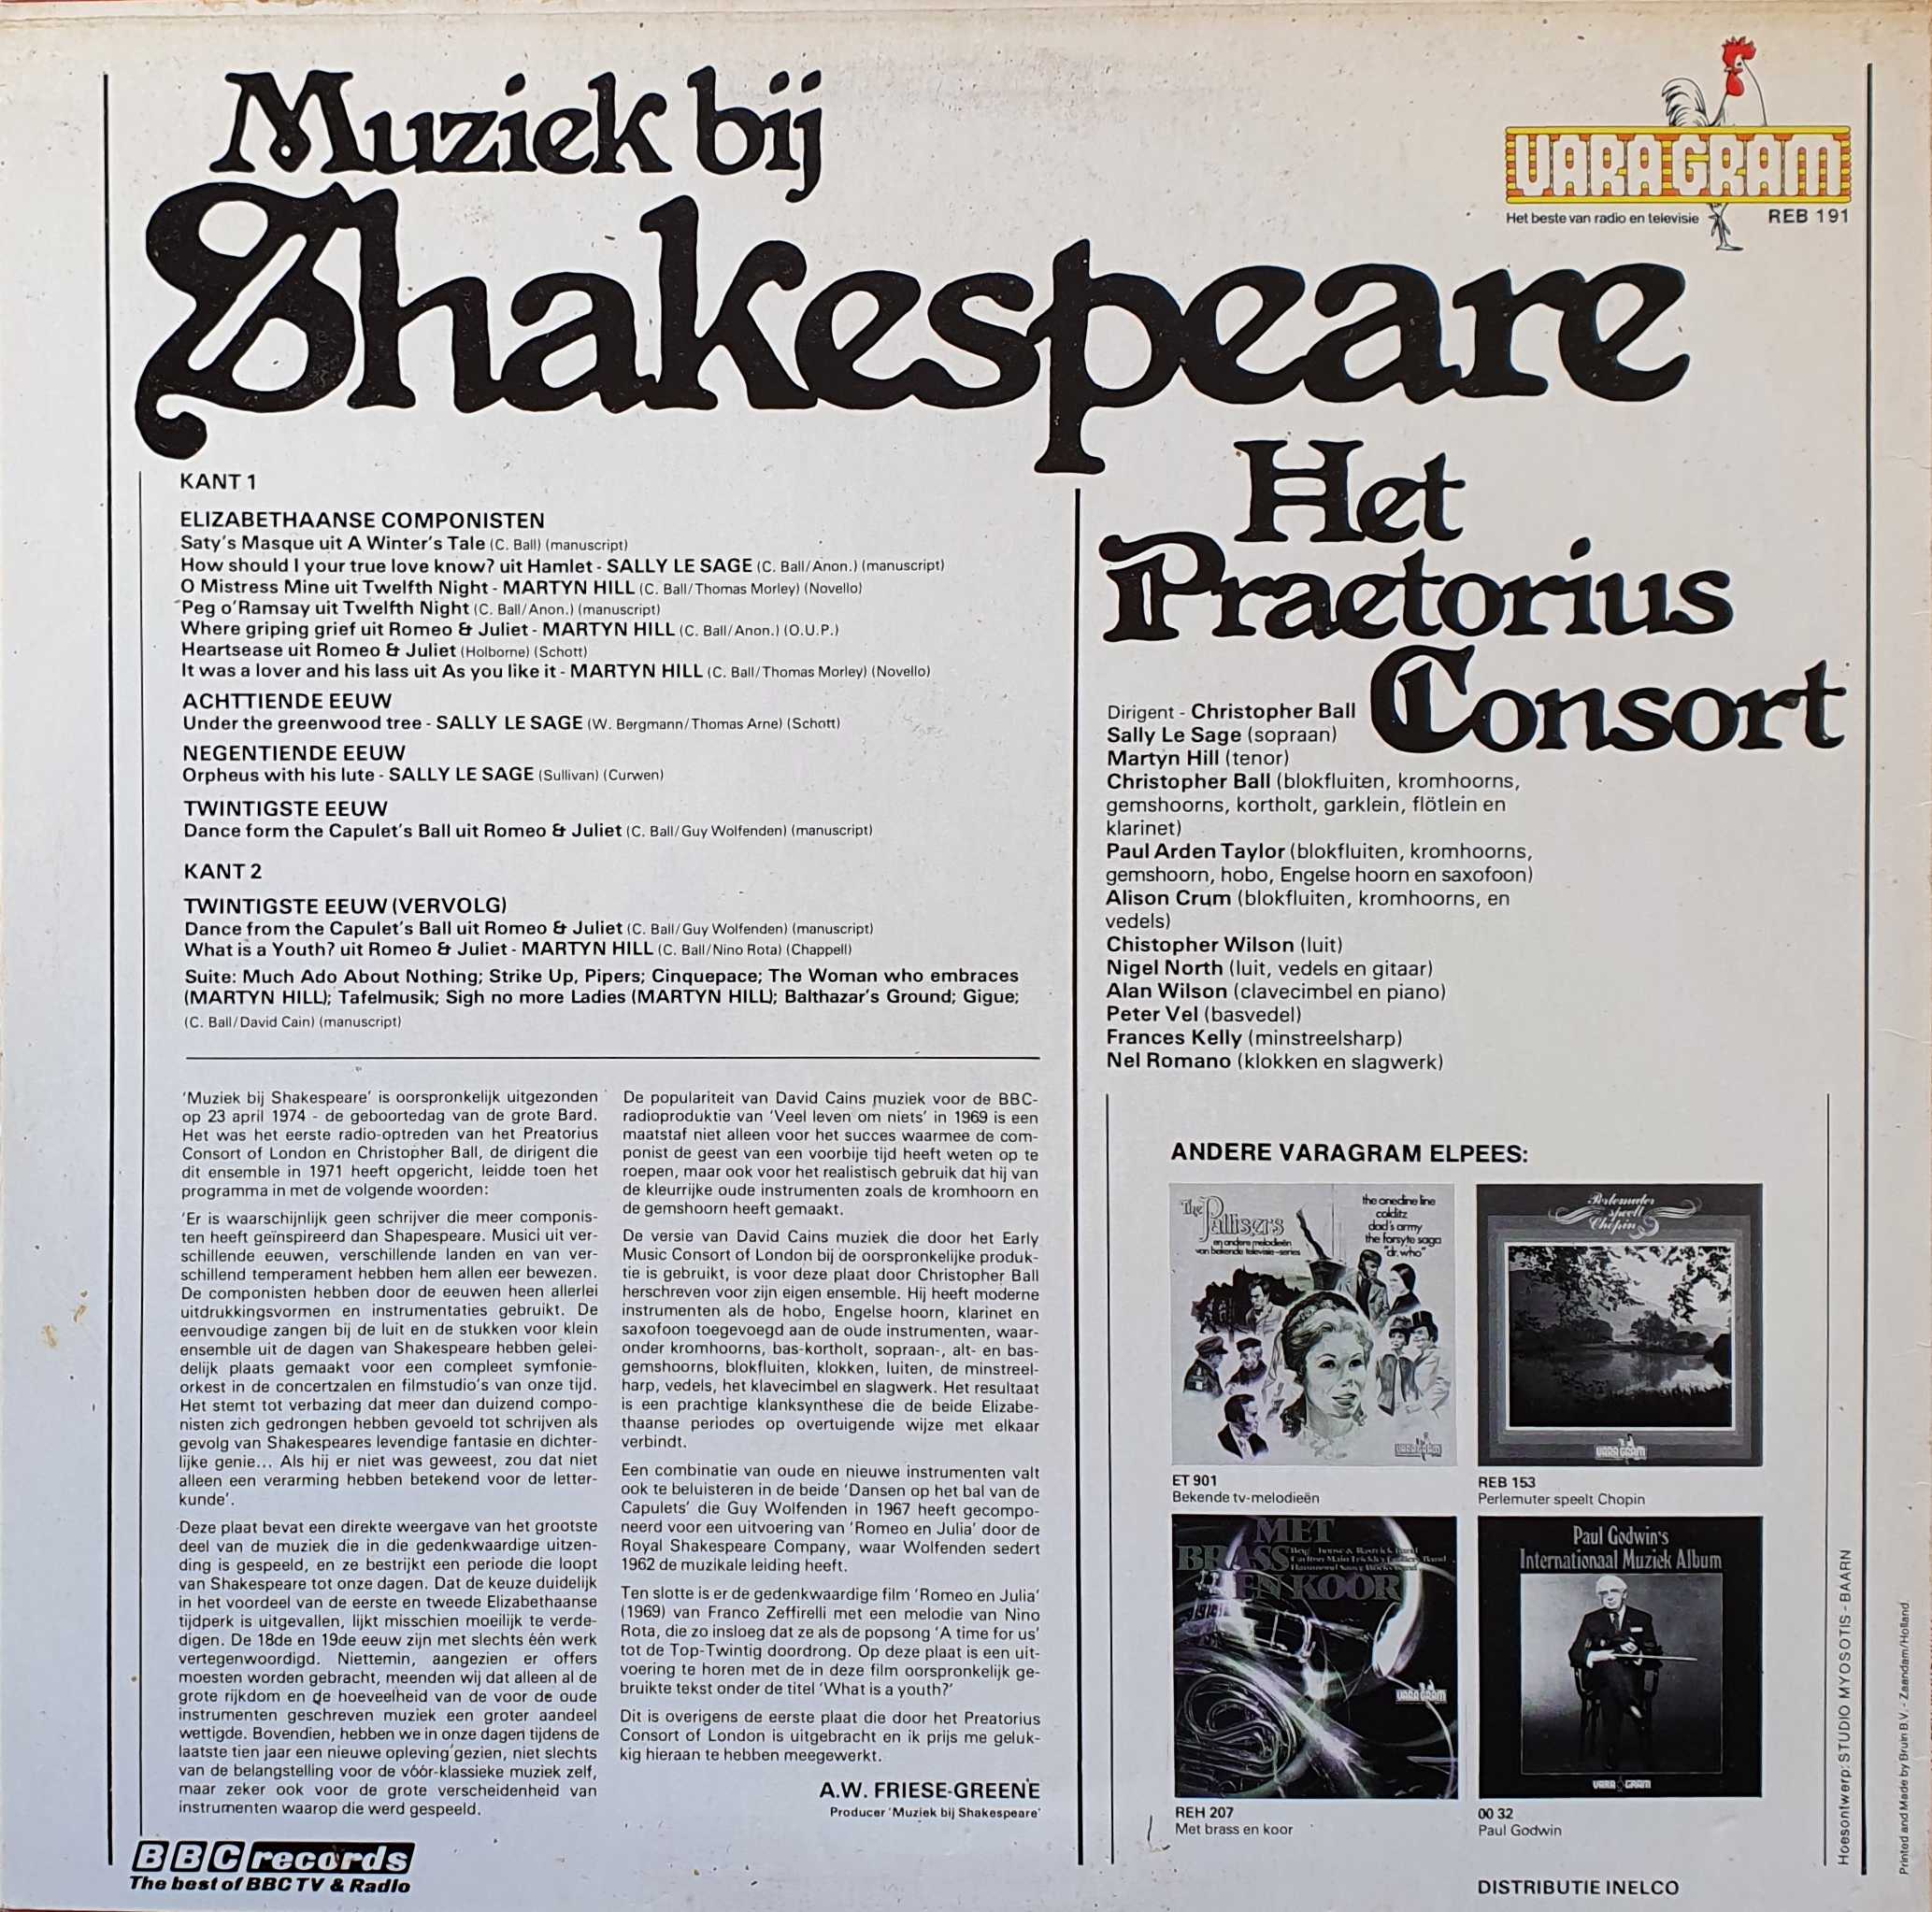 Picture of REB 191-iD Muziek bij Shakespeare by artist The Praetorius Consort from the BBC records and Tapes library